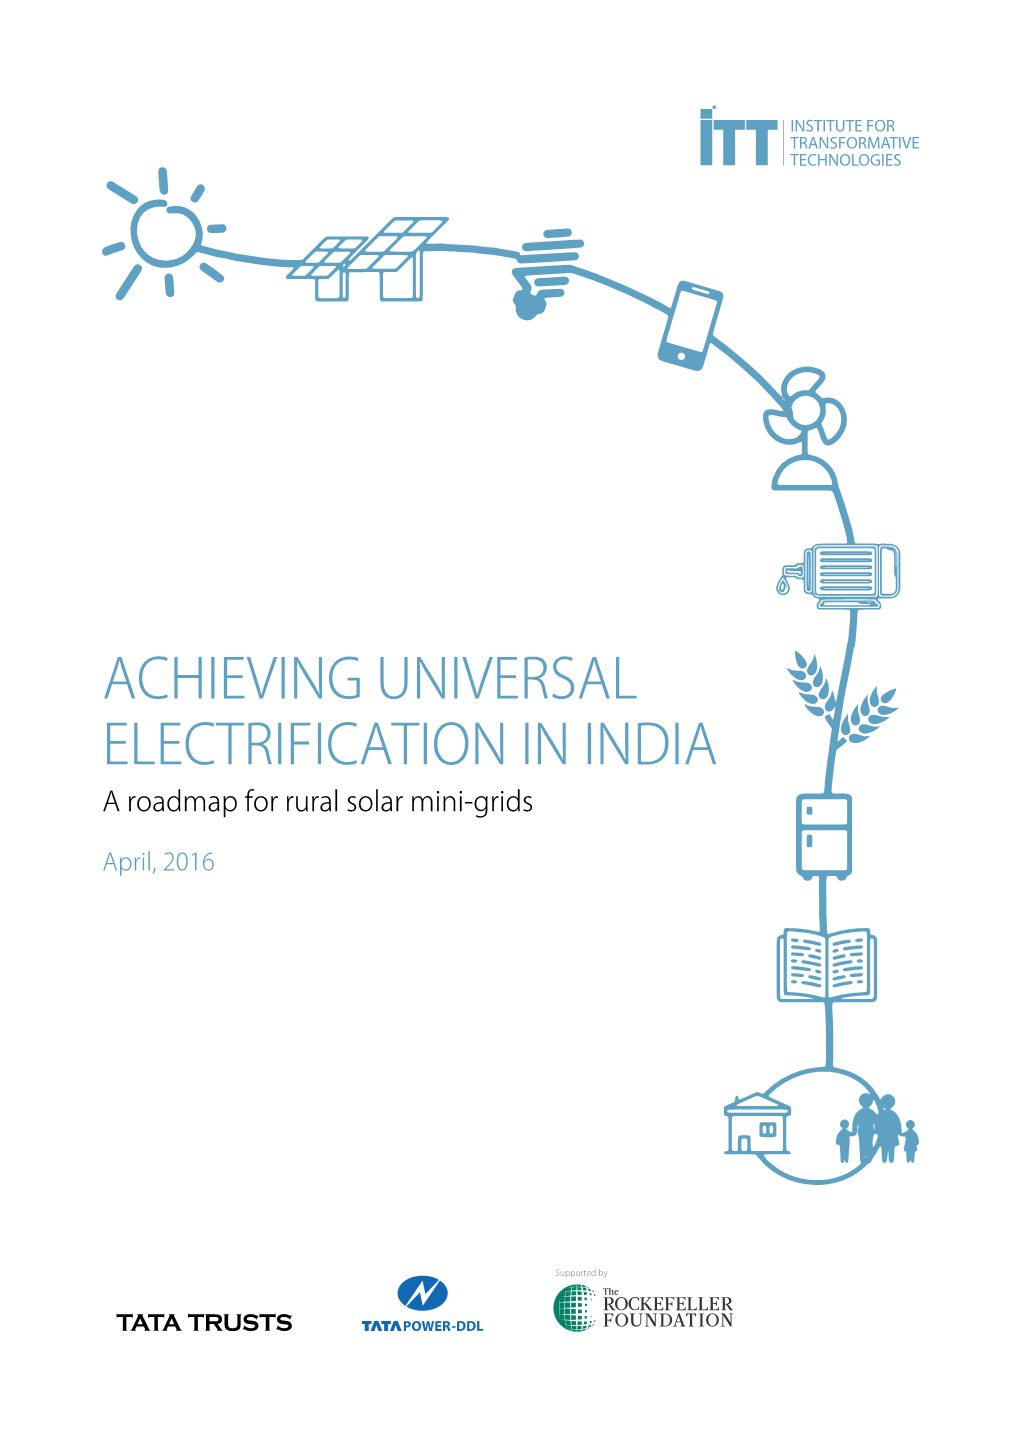 Achieving Universal Electrification in India a Roadmap for Rural Solar Mini-Grids